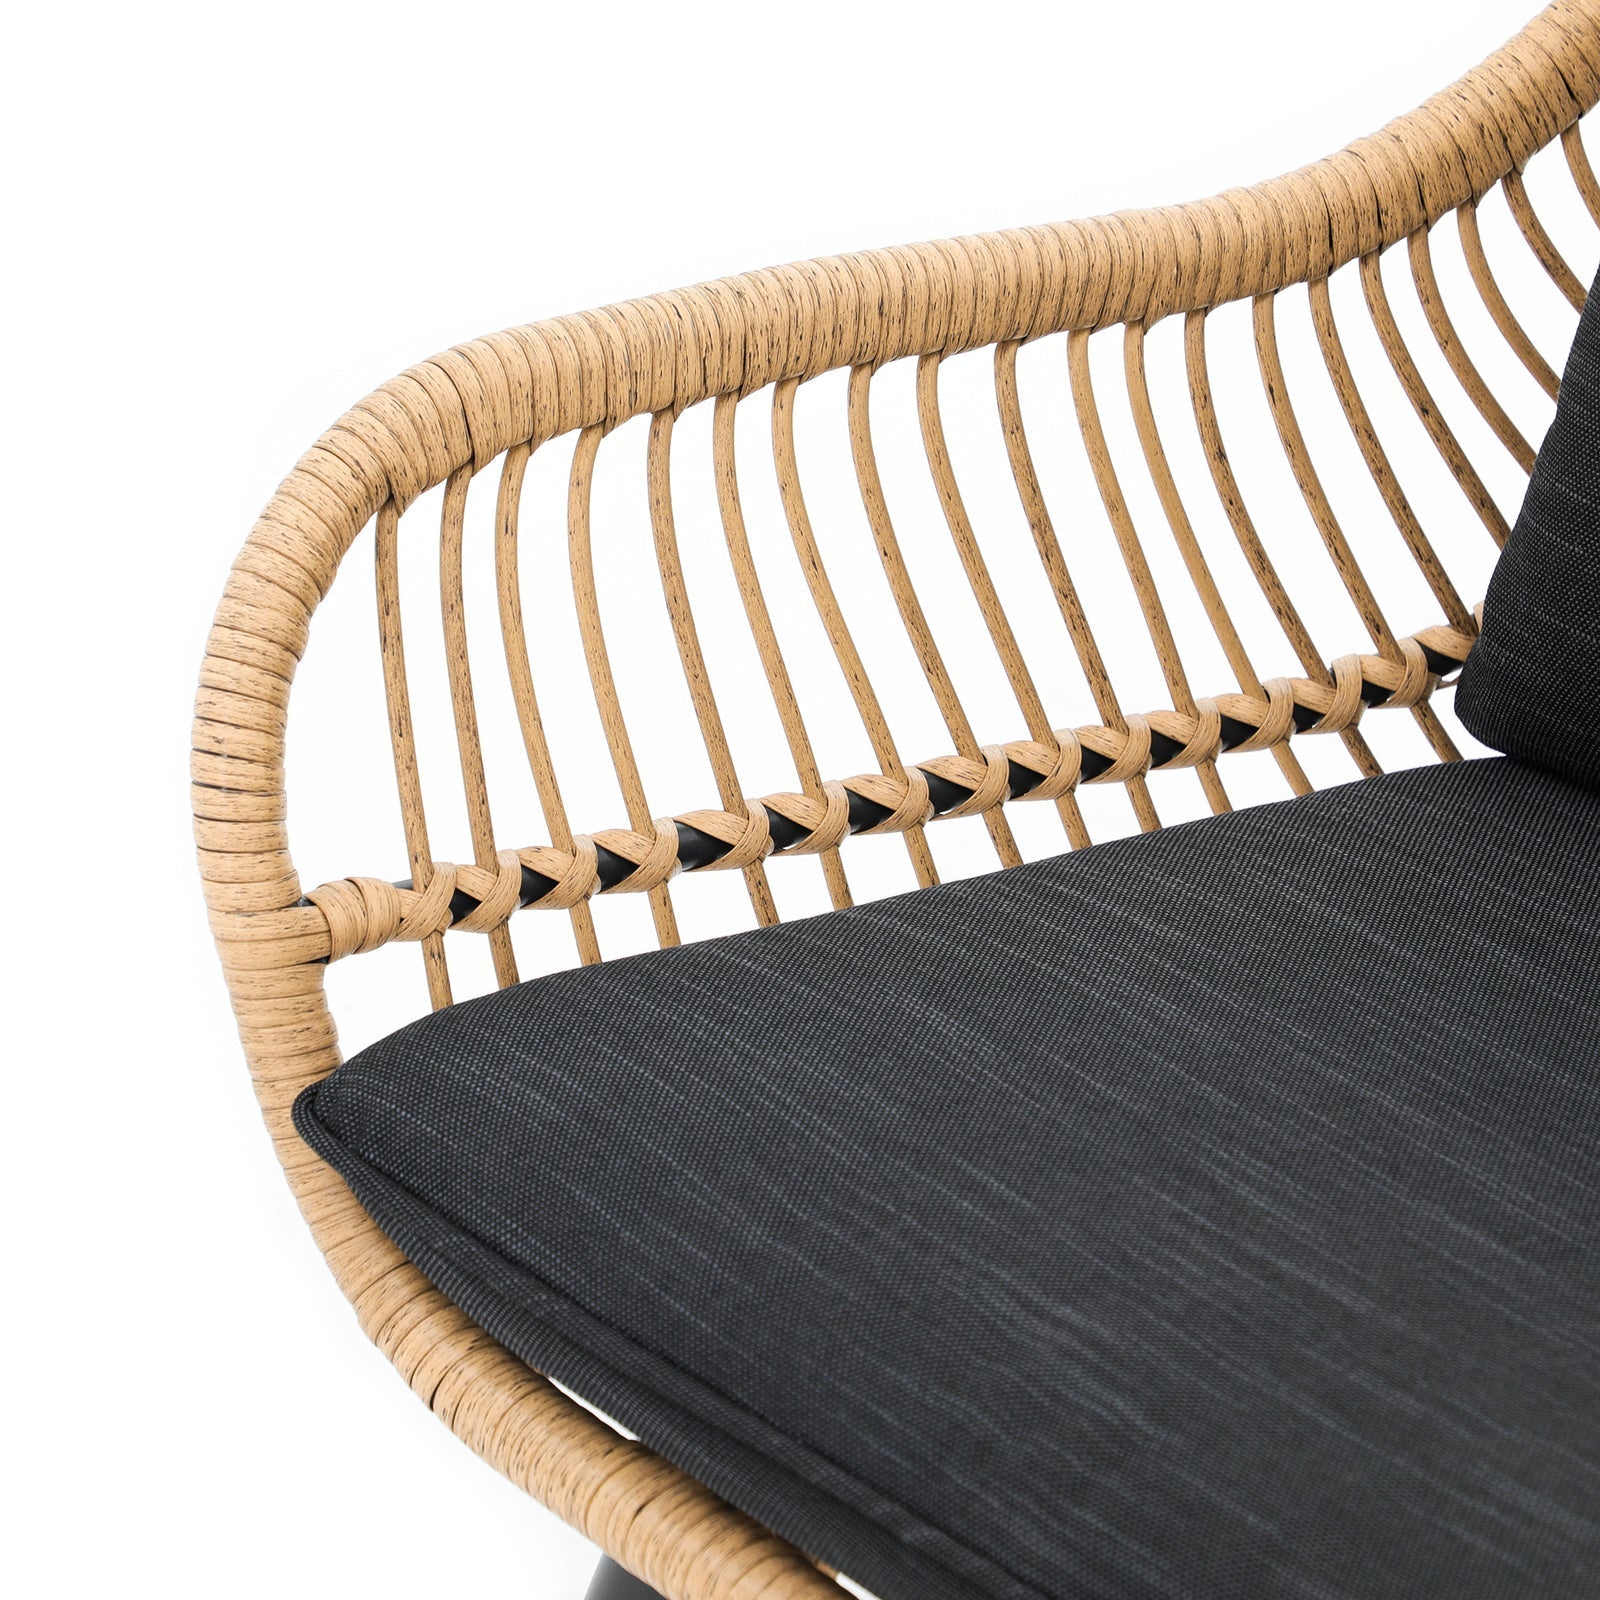 Oia Natural Wicker Chair, Boho Style Wicker, Black Cushion, Hand-woven Wicker Detailed Information-Jardina Furniture#Color_Black